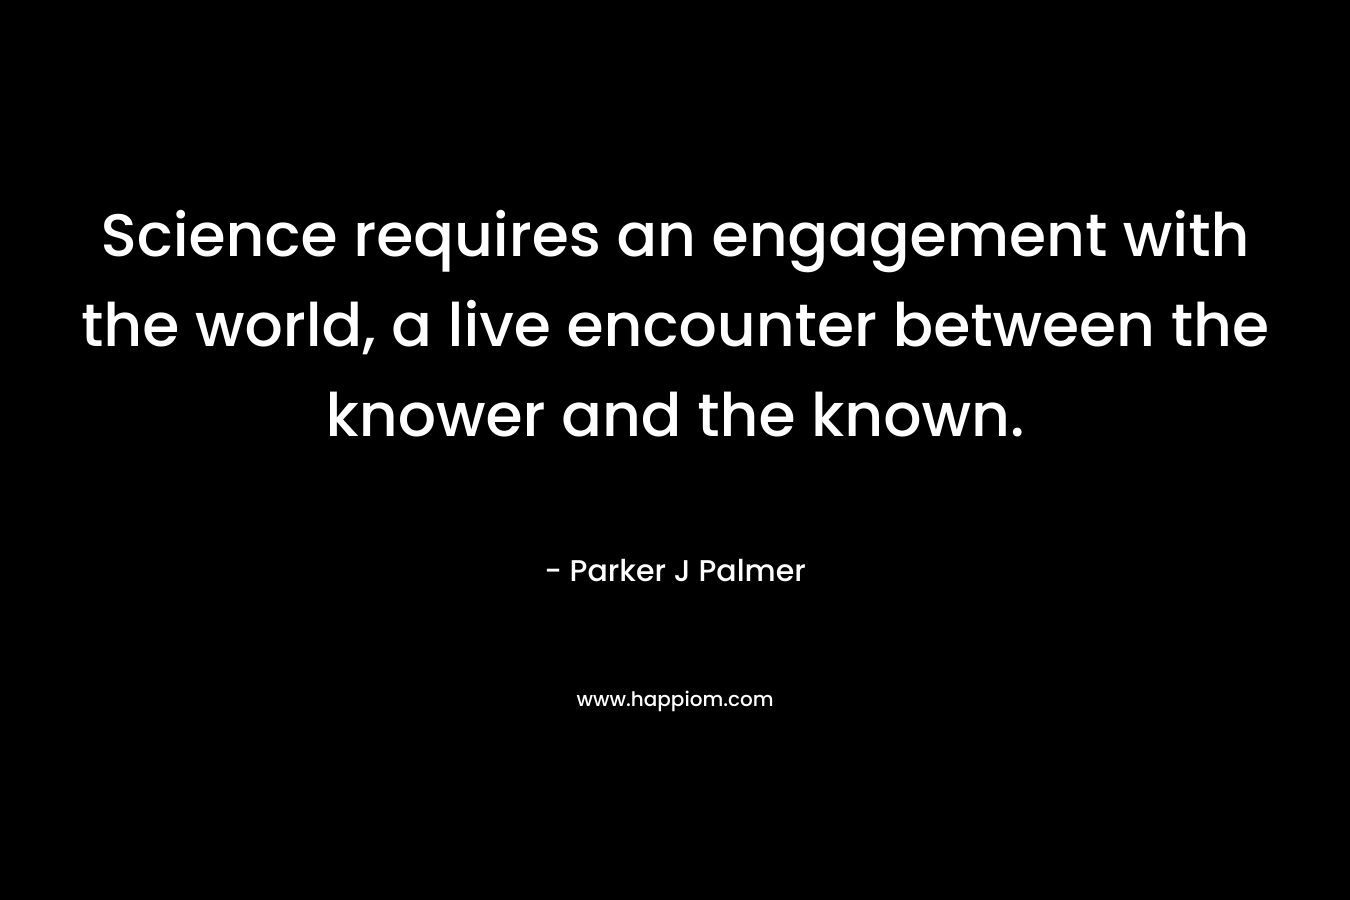 Science requires an engagement with the world, a live encounter between the knower and the known. – Parker J Palmer